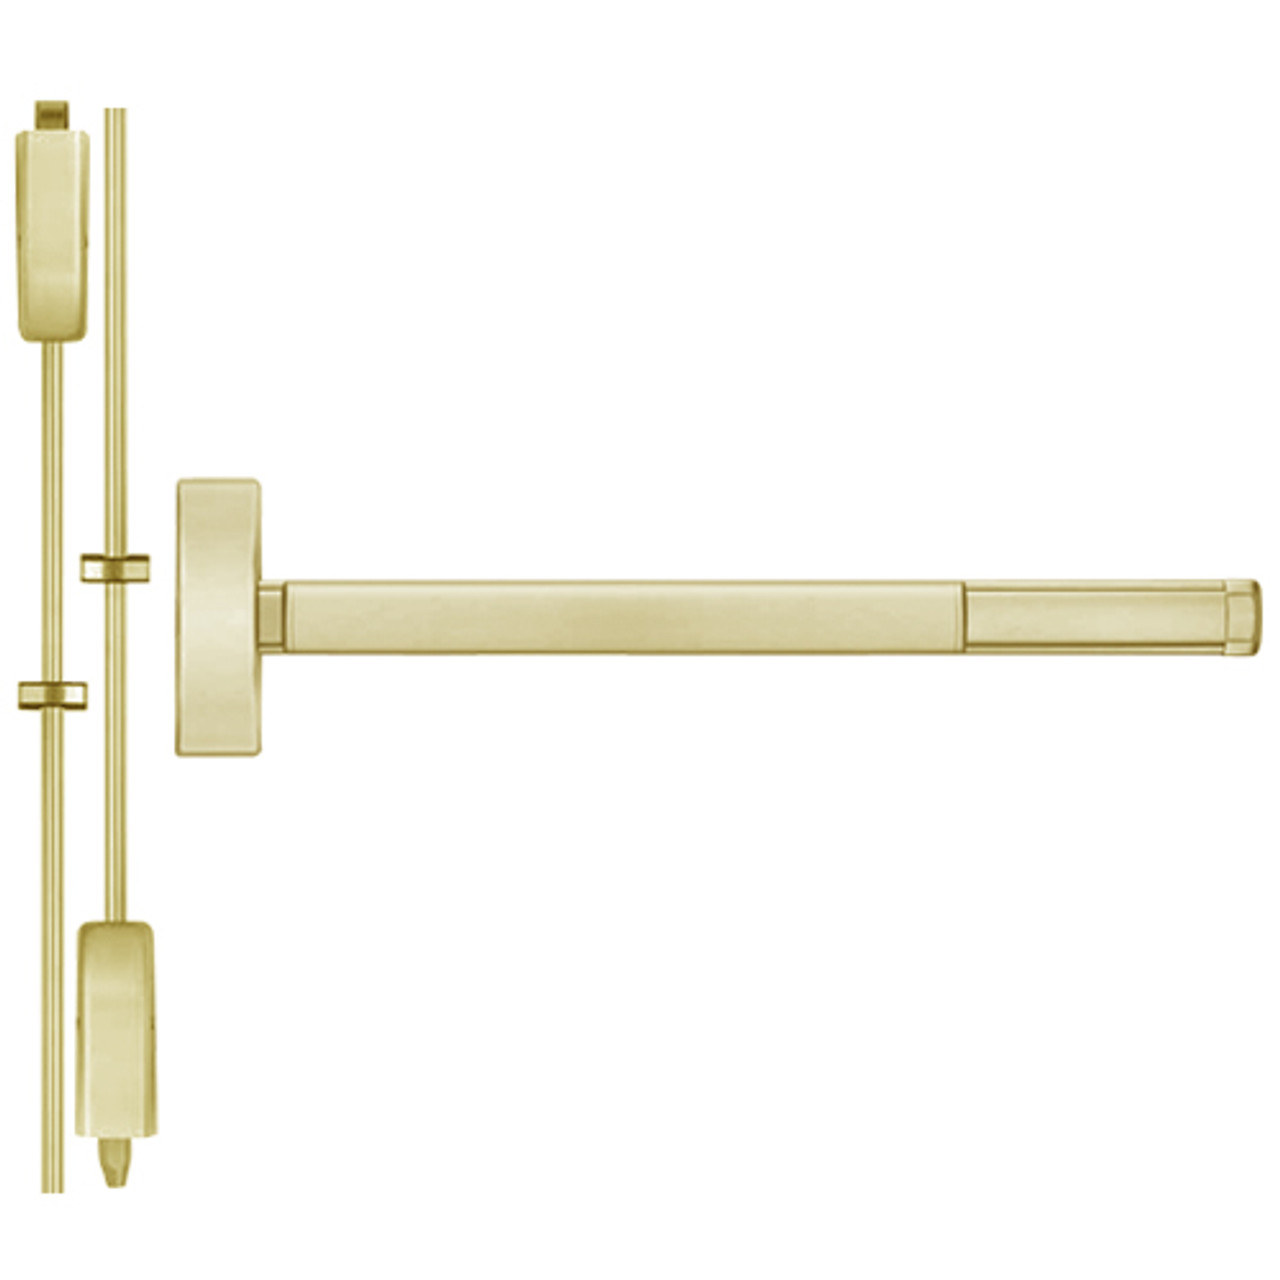 TS2208-606-36 PHI 2200 Series Non Fire Rated Apex Surface Vertical Rod Device with Touchbar Monitoring Switch Prepped for Key Controls Lever/Knob in Satin Brass Finish